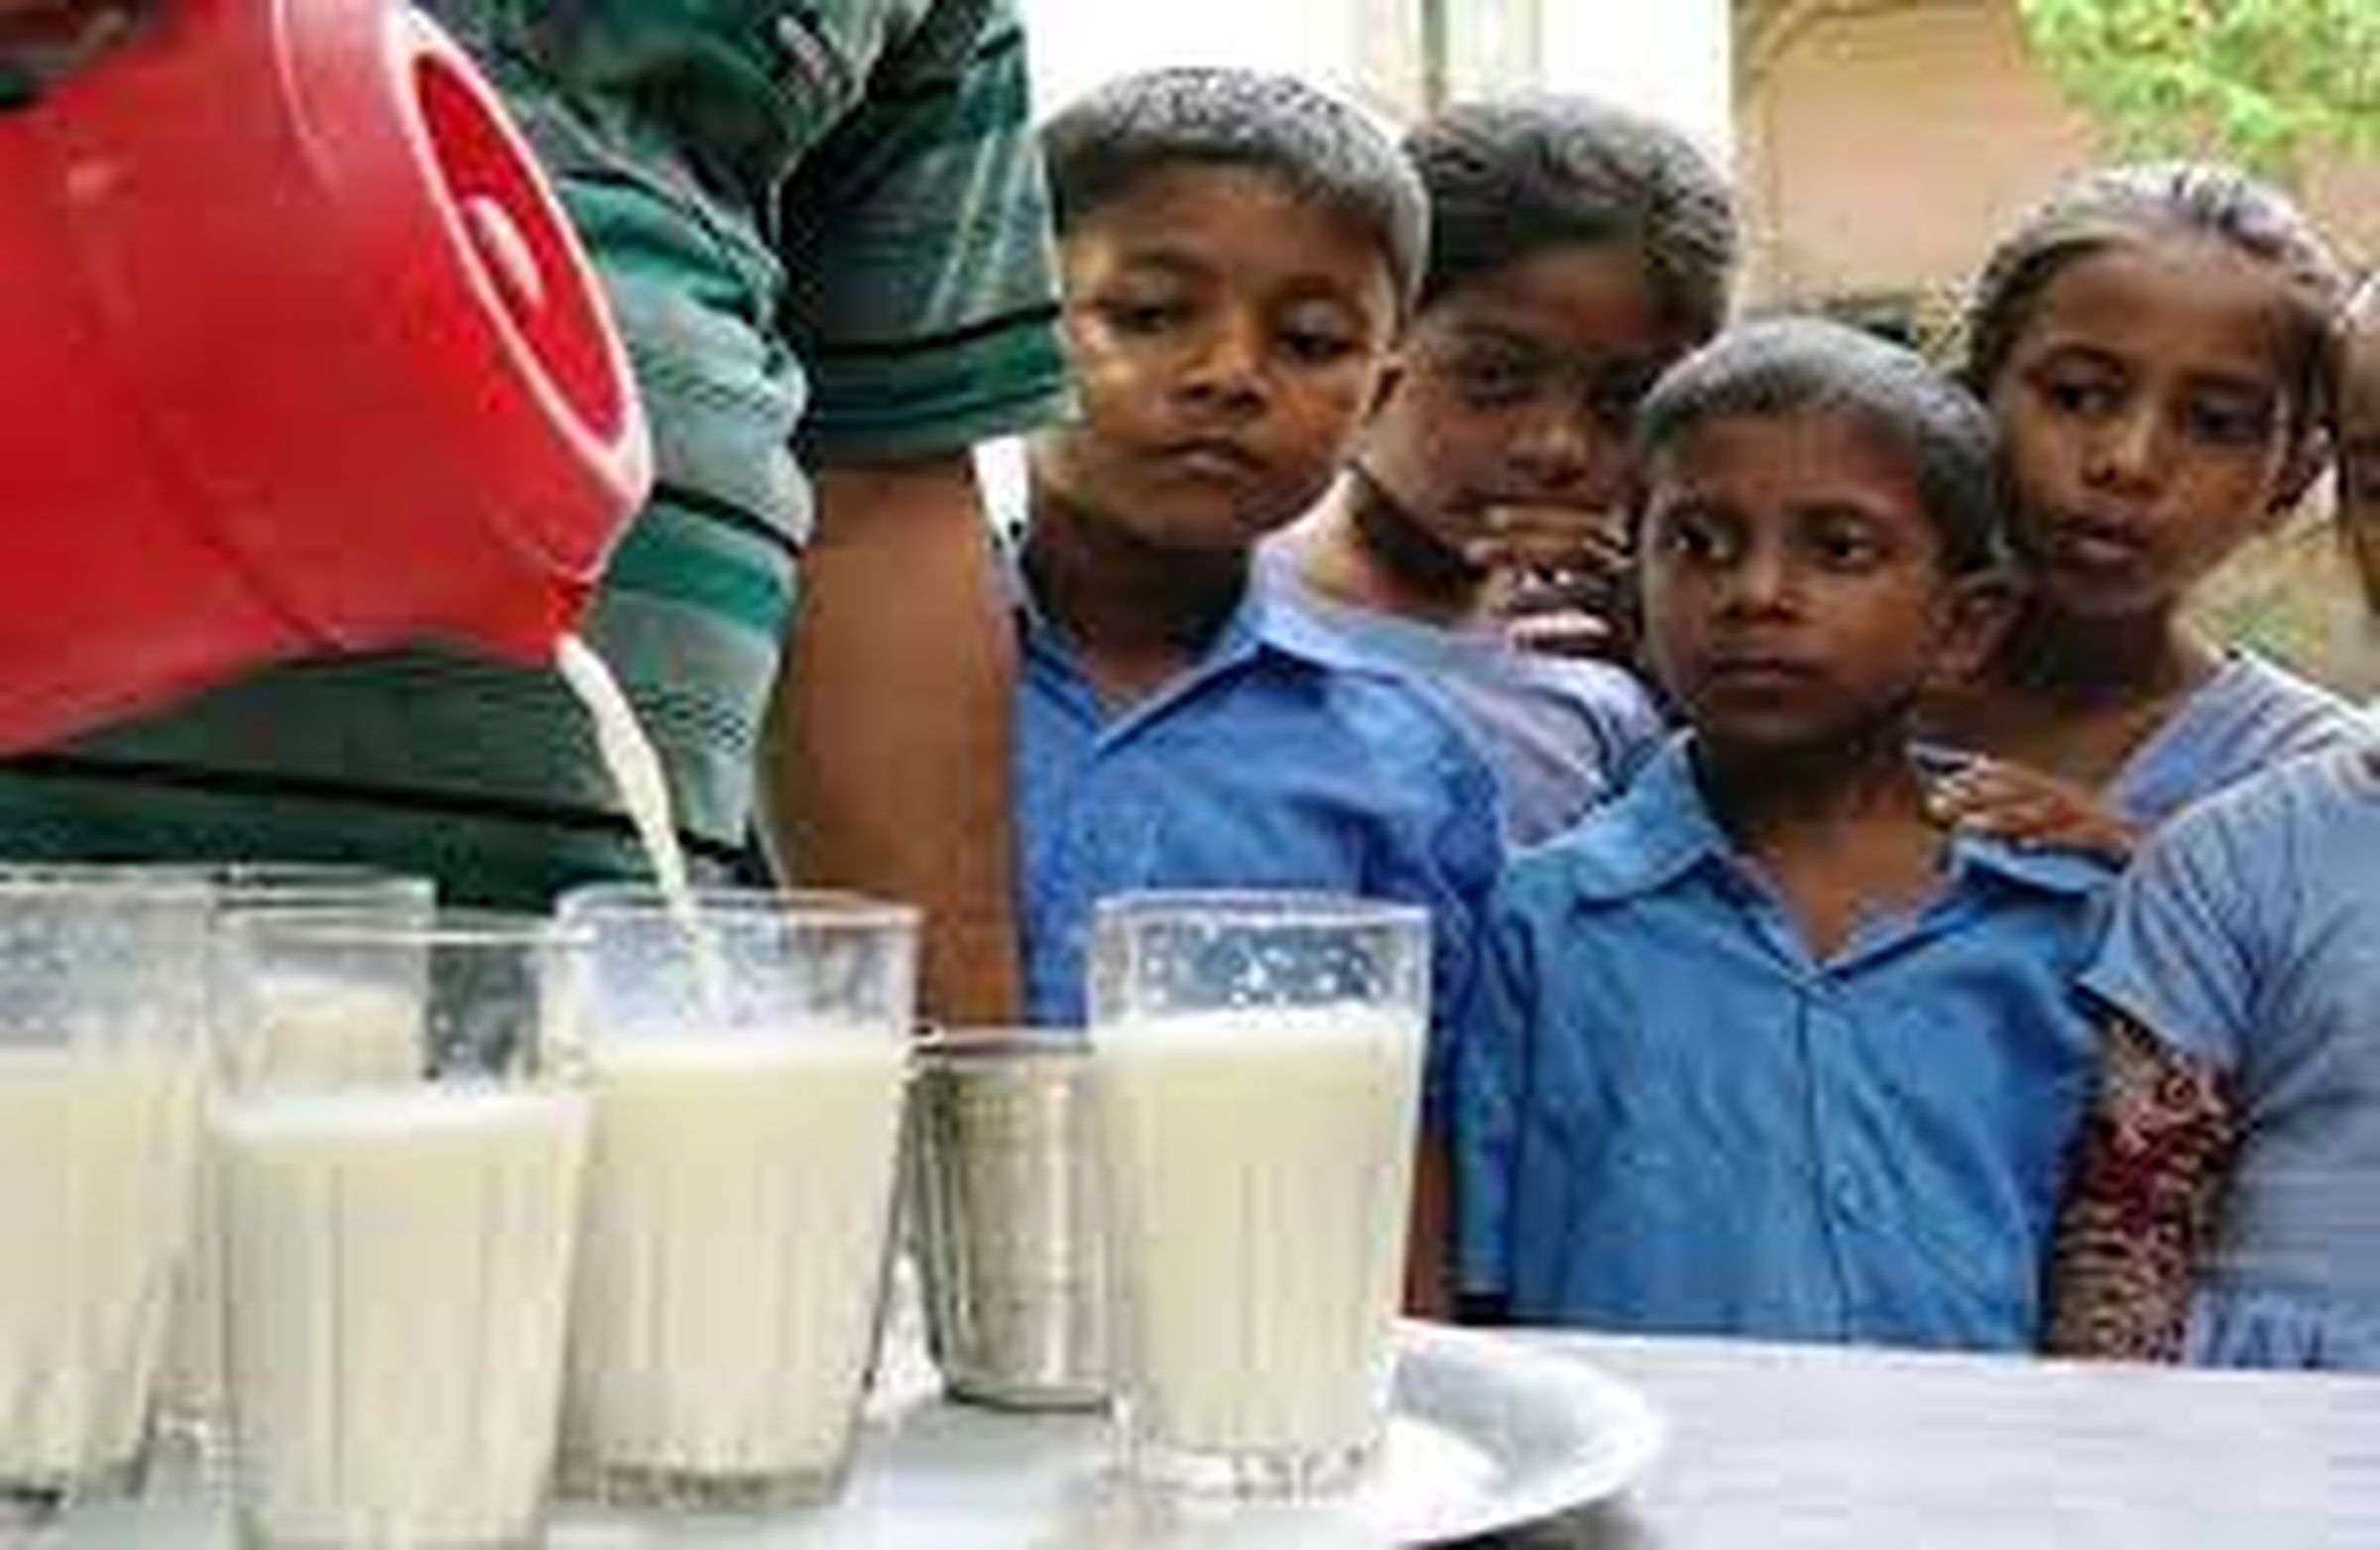 Now get rid of powder, cow milk will be available in government schools